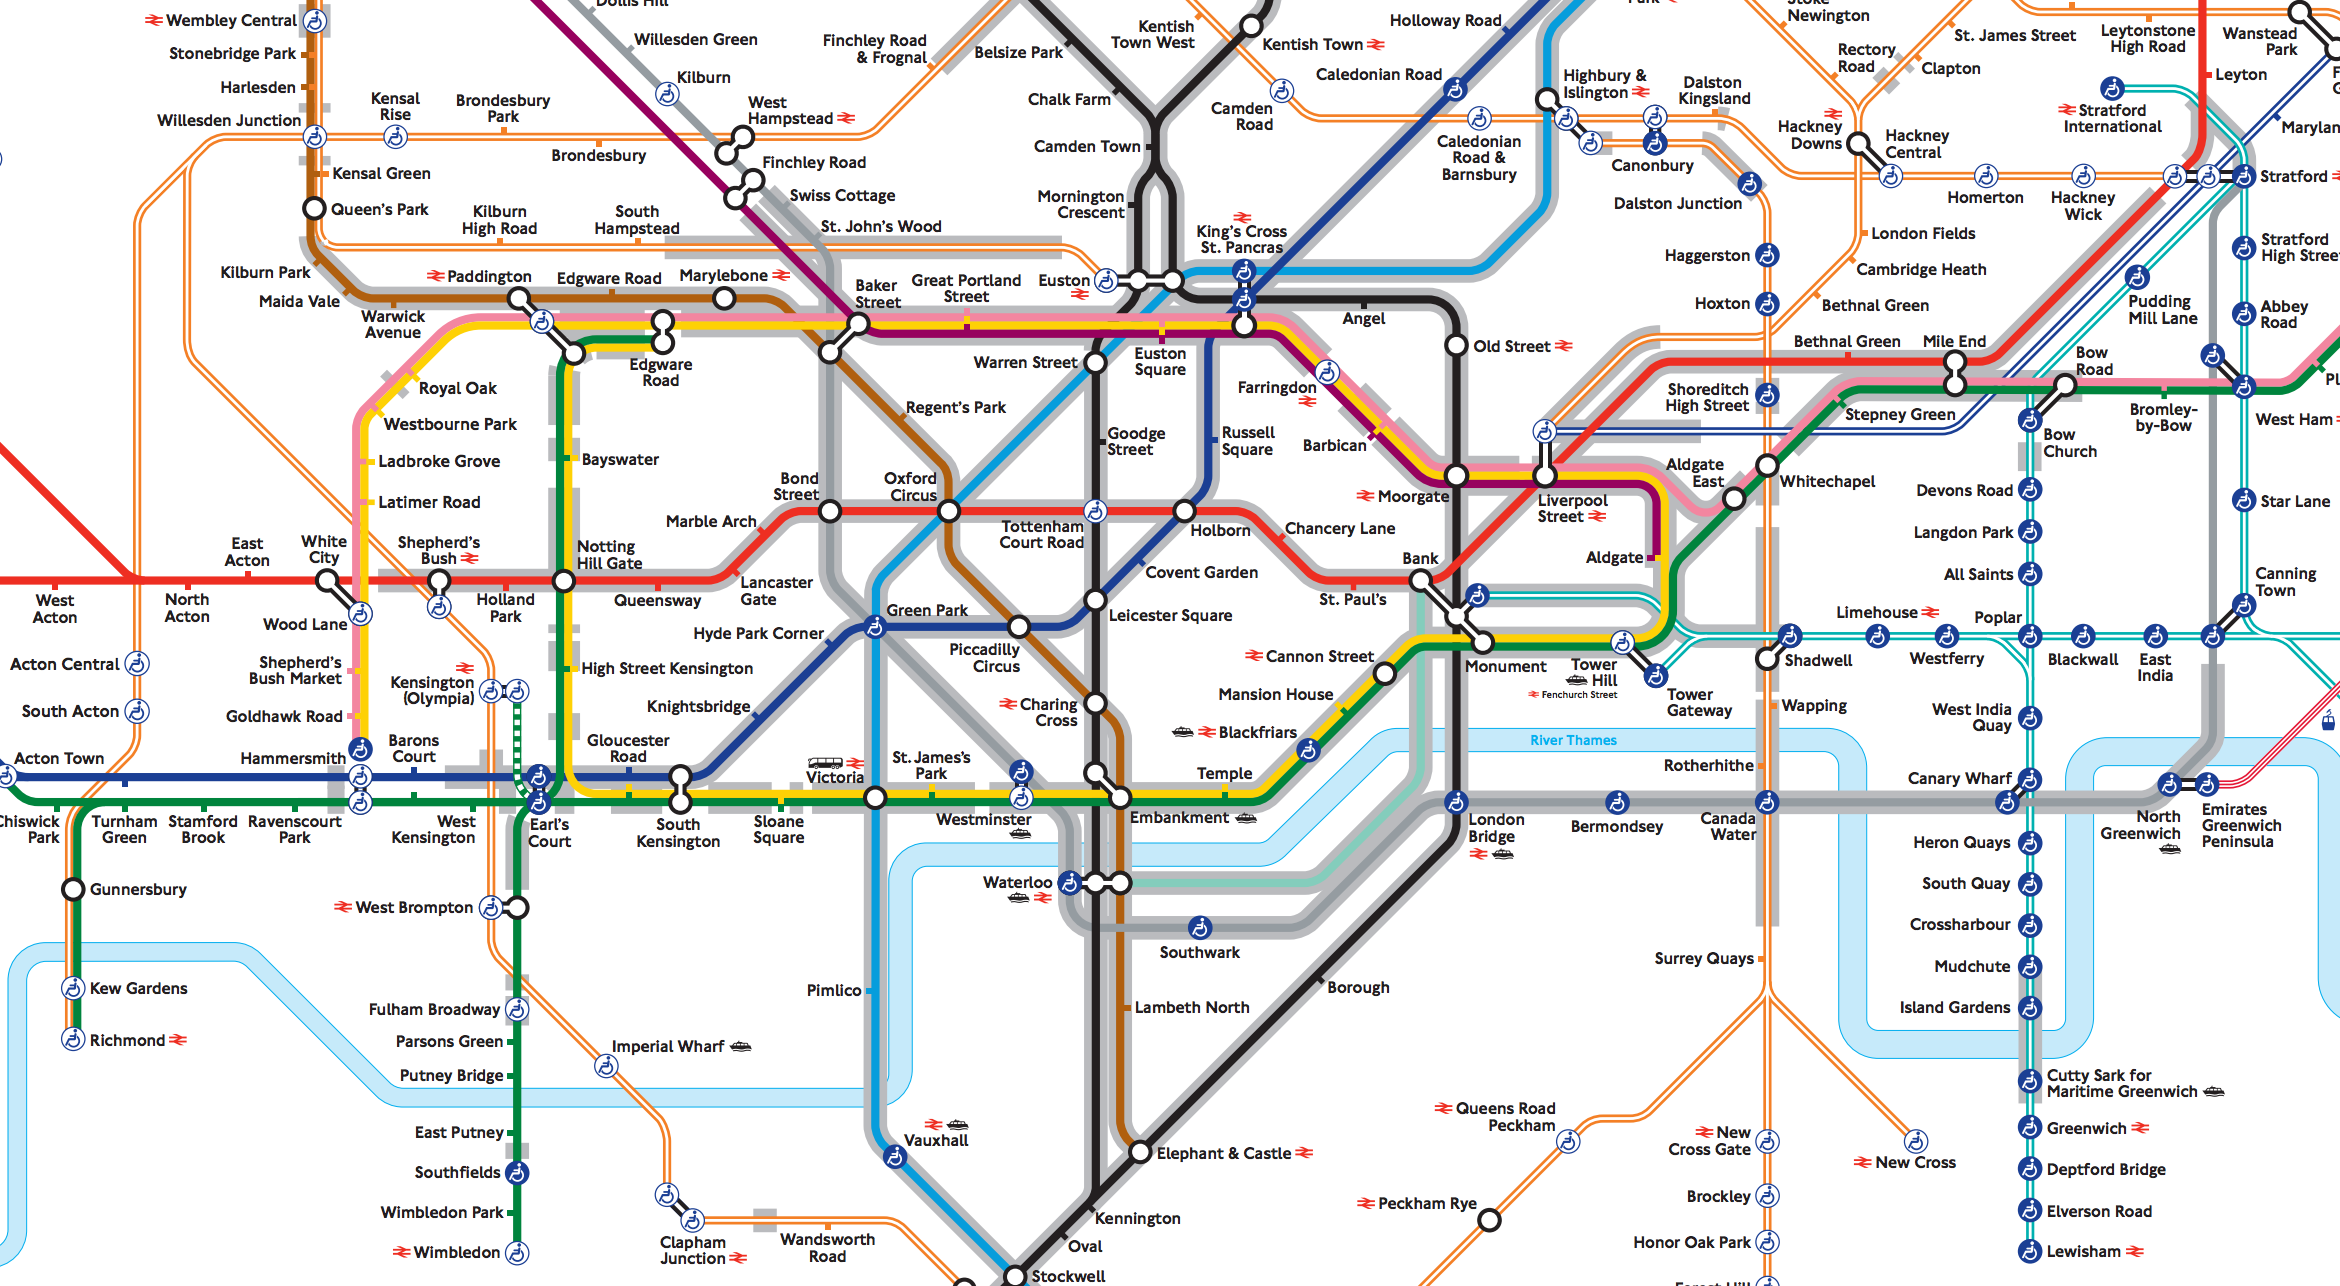 the tube map